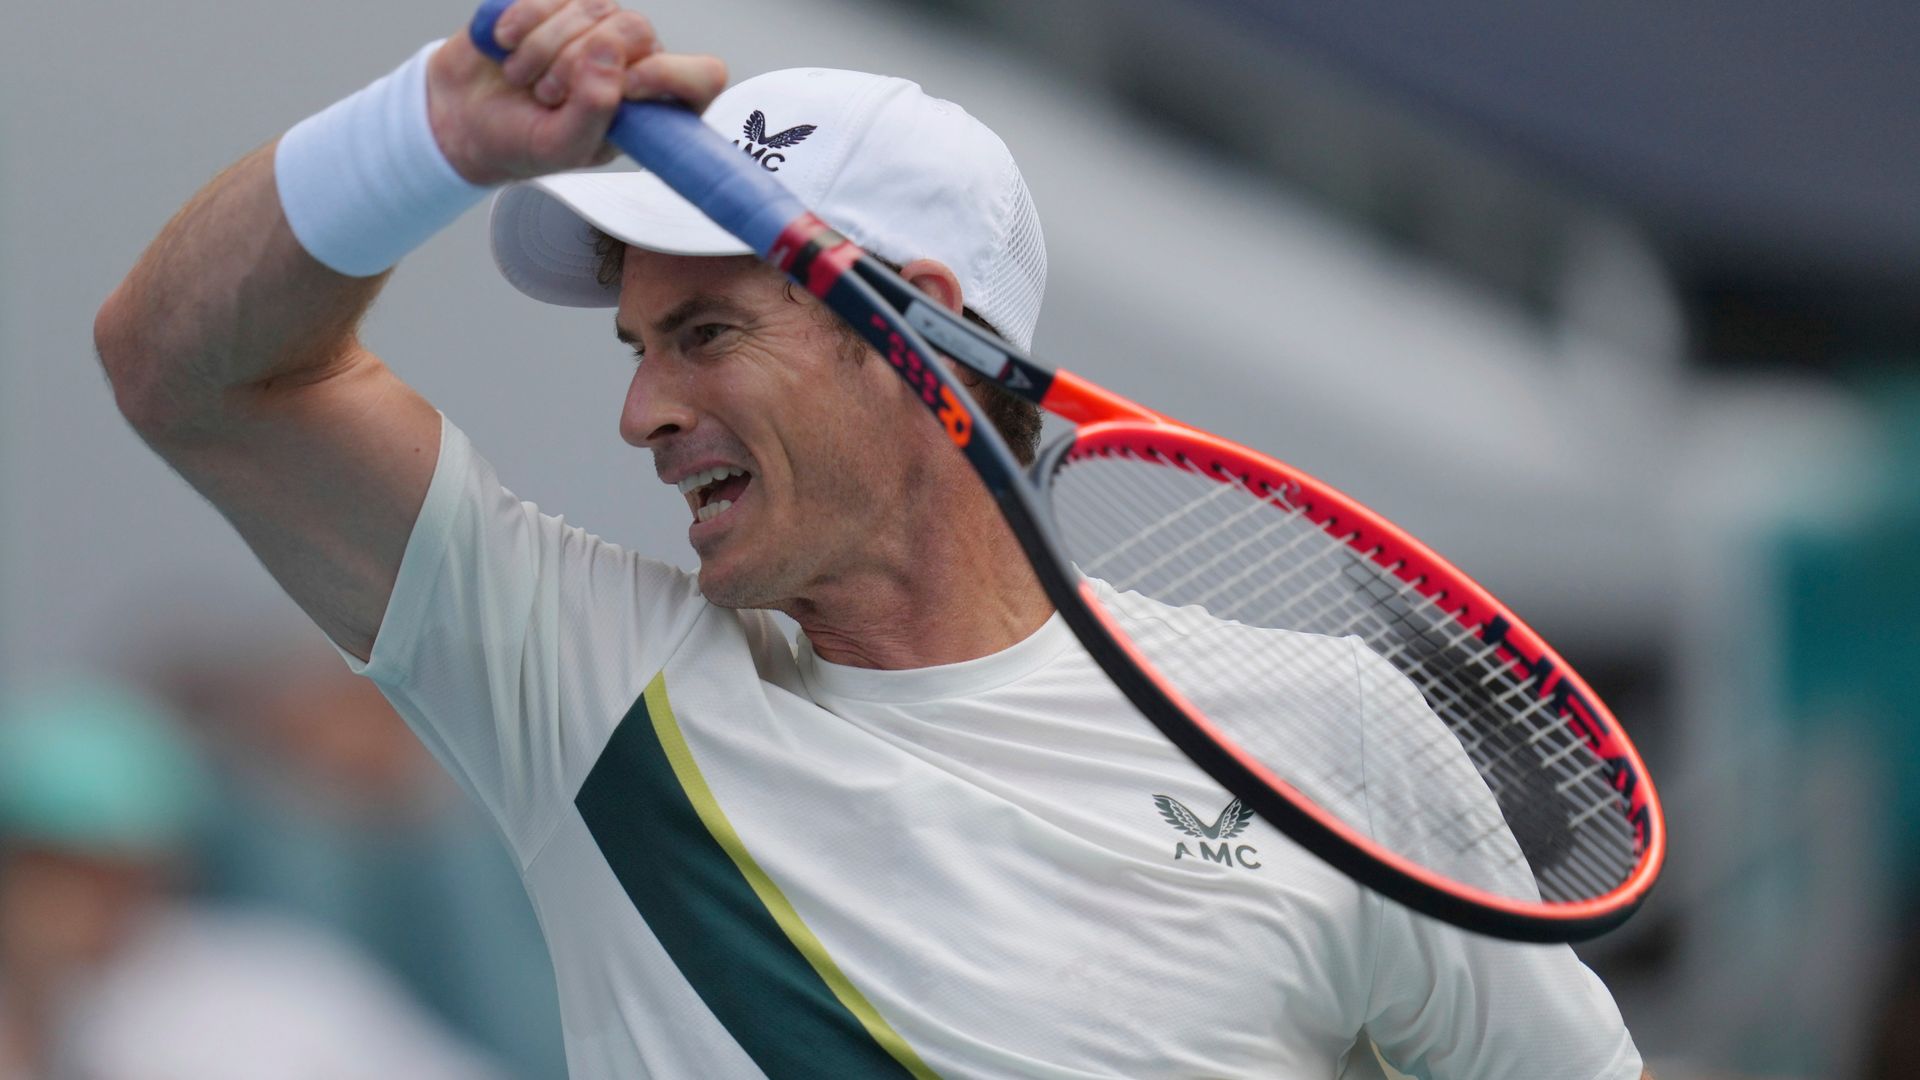 Murray dumped out in first round at Miami Open